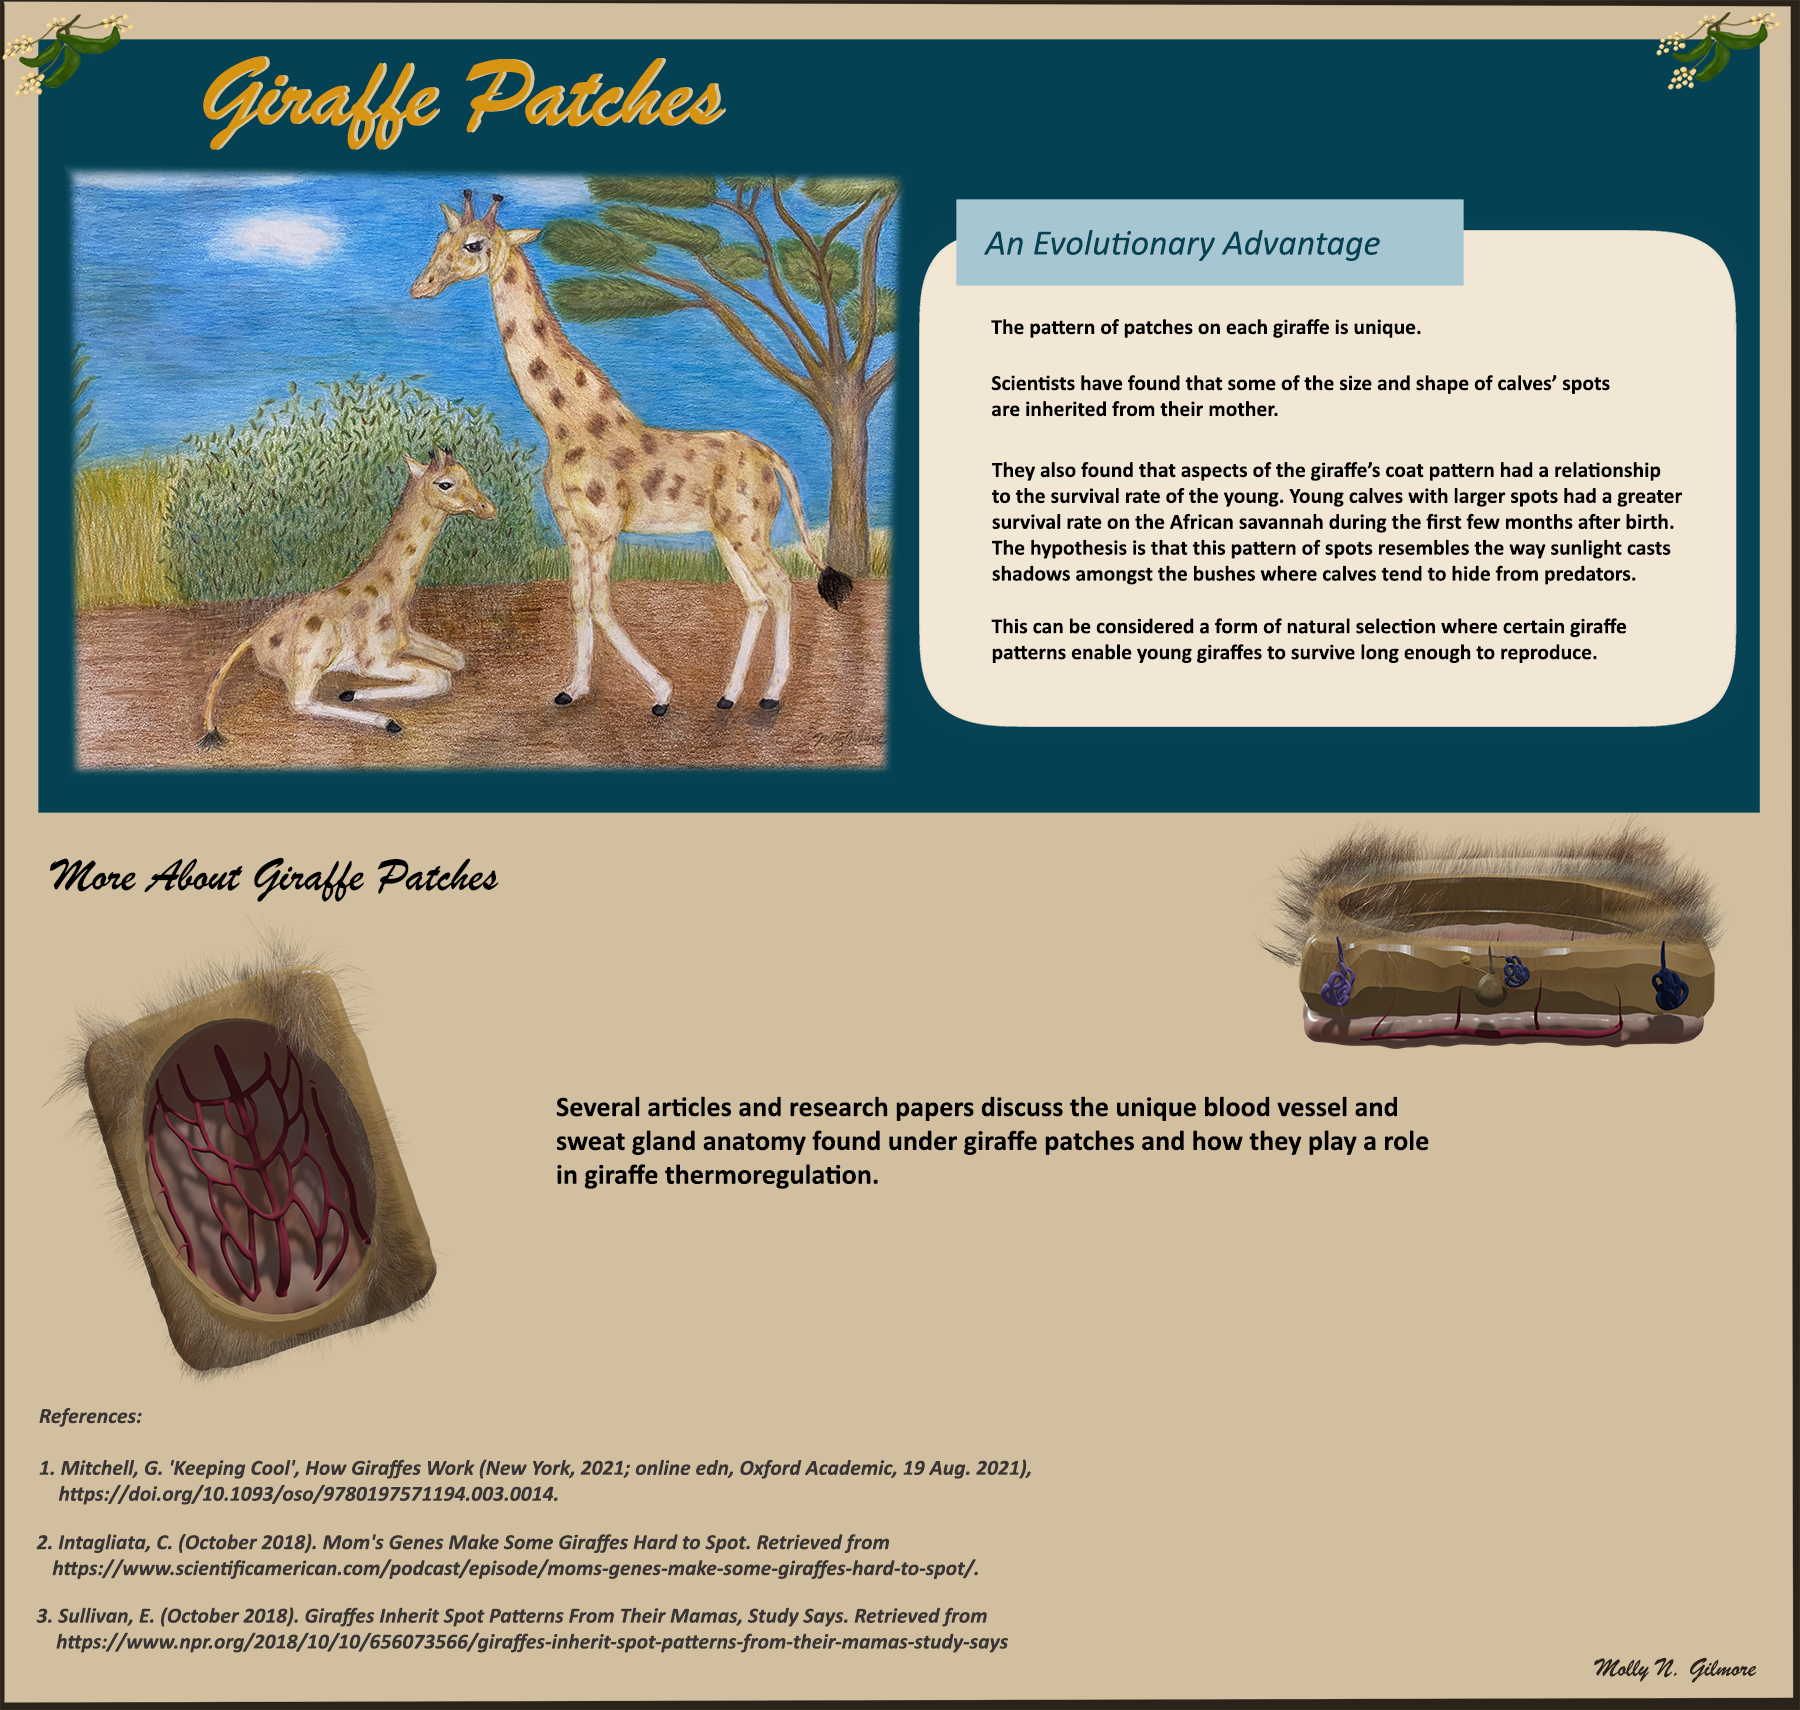 color pencil drawing and 3D models showing giraffes and their skin patches